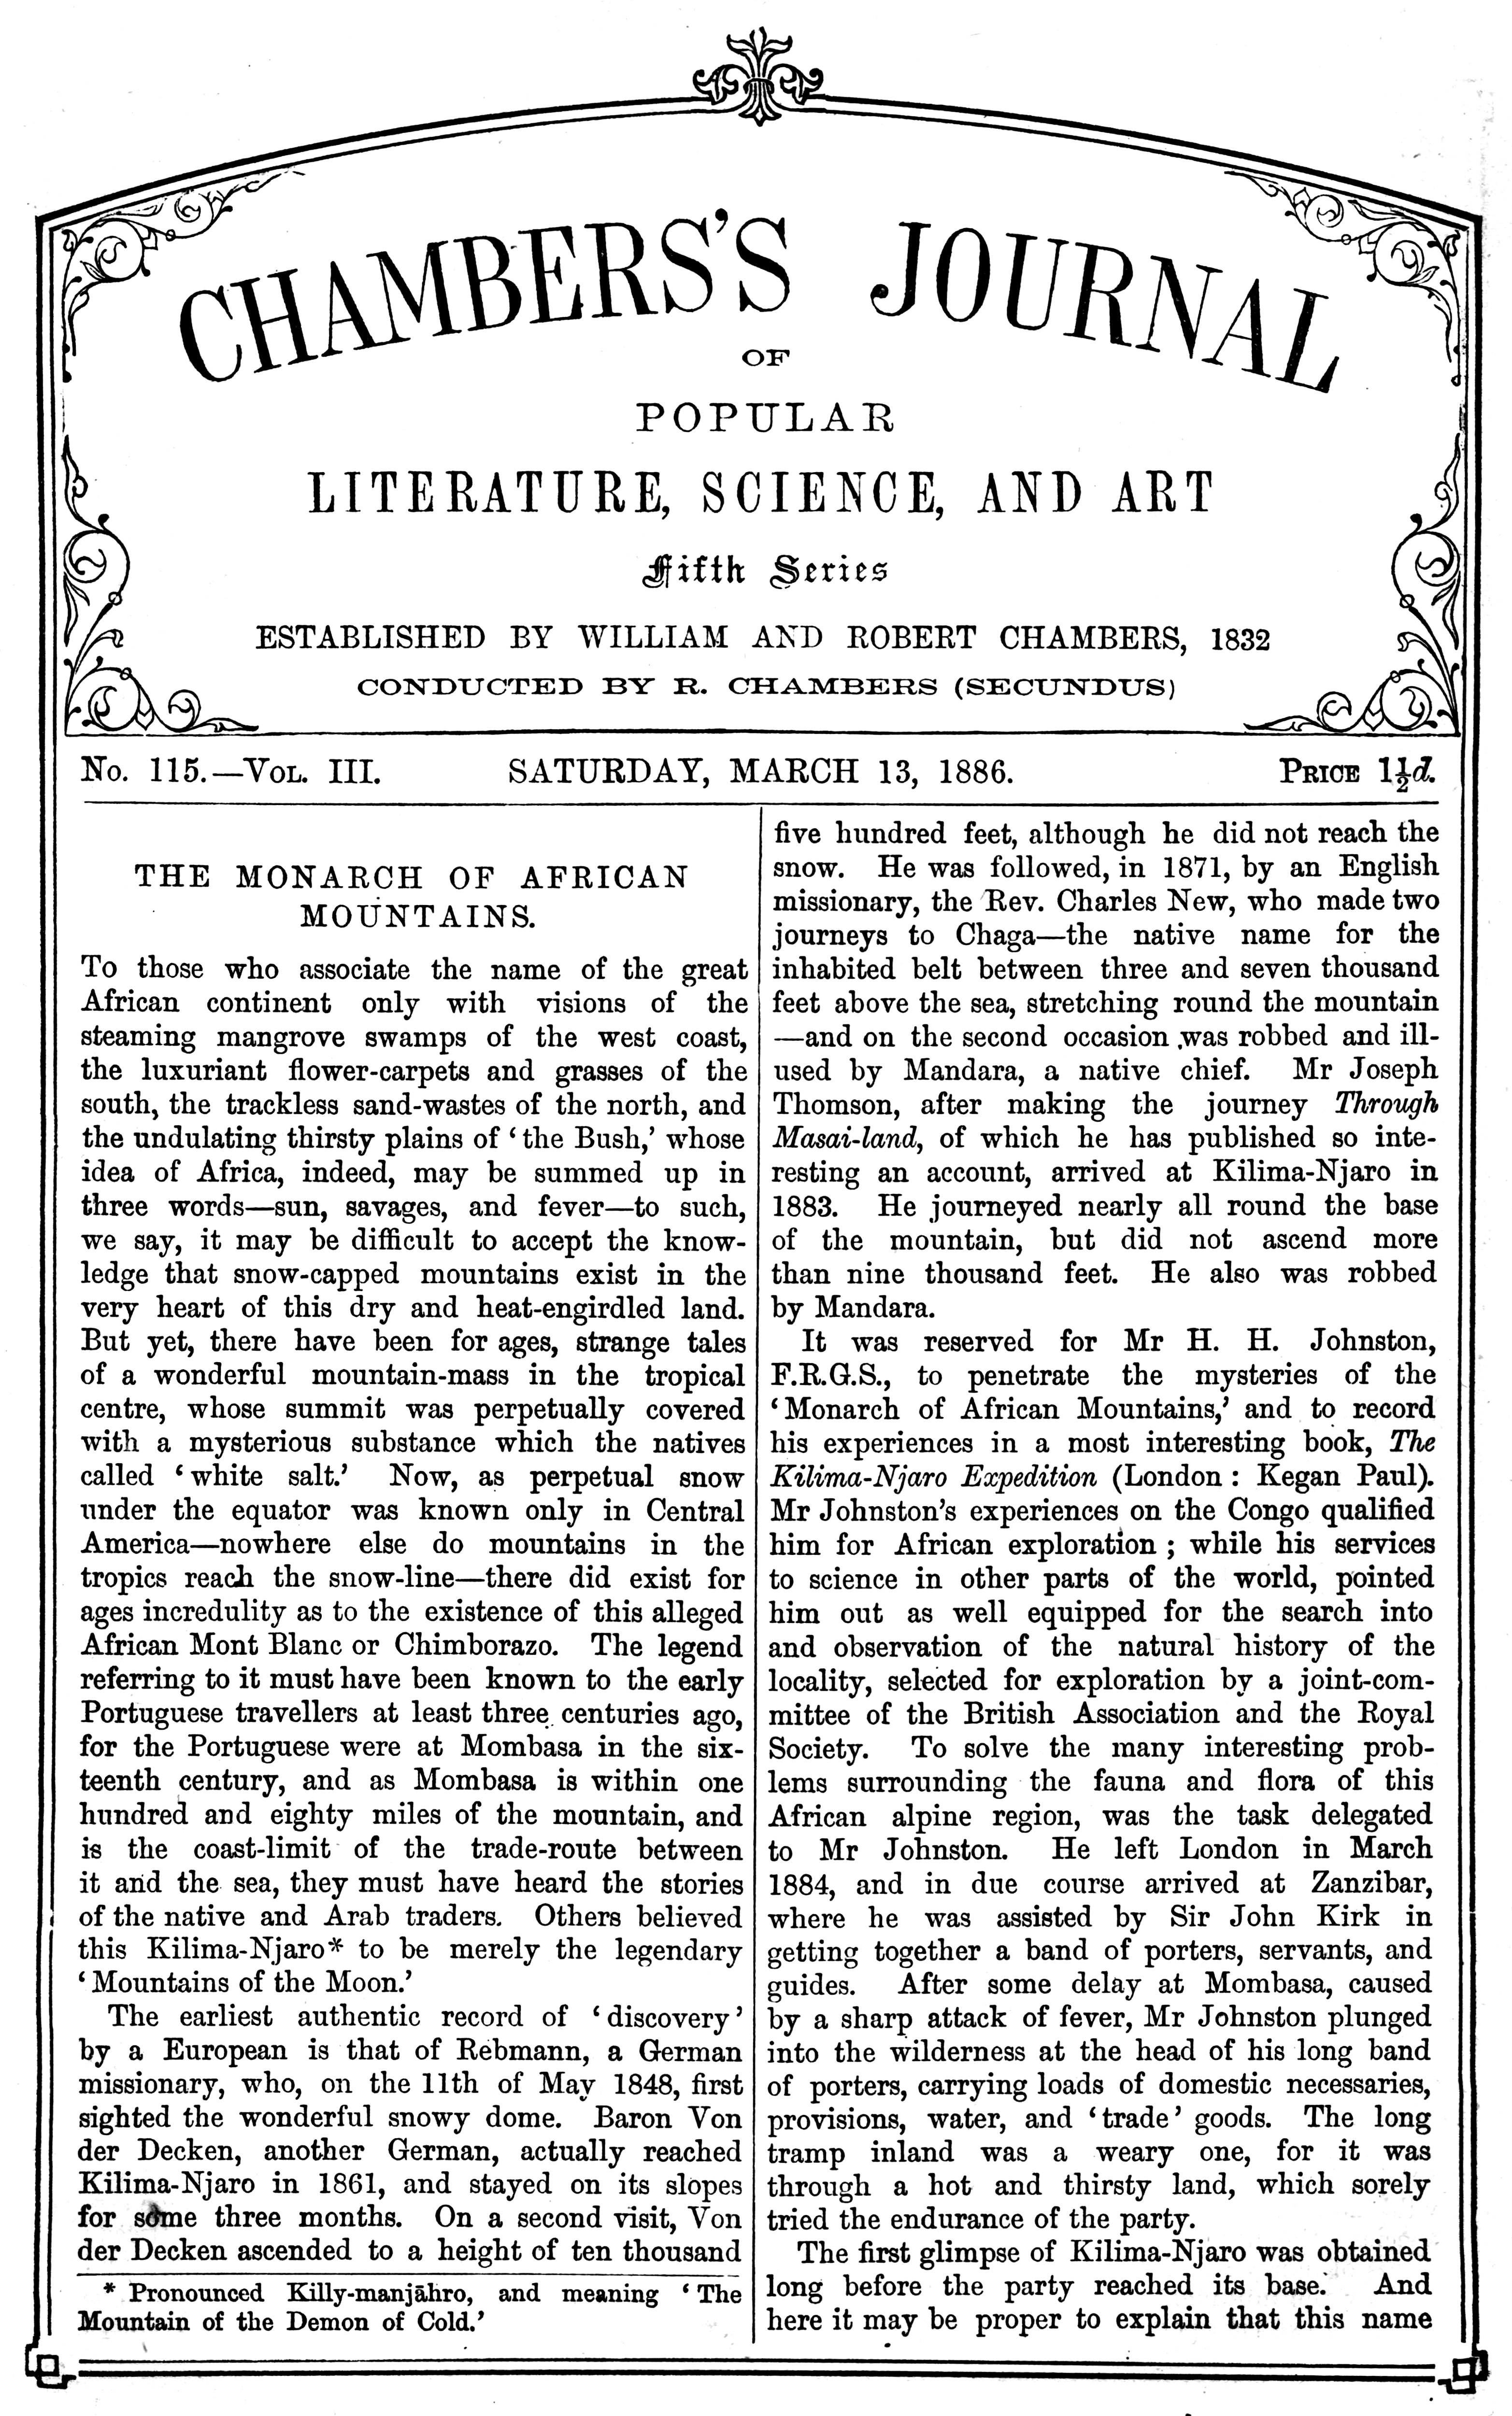 Chambers's Journal of Popular Literature, Science, and Art, Fifth Series, No. 115, Vol. III, March 13, 1886